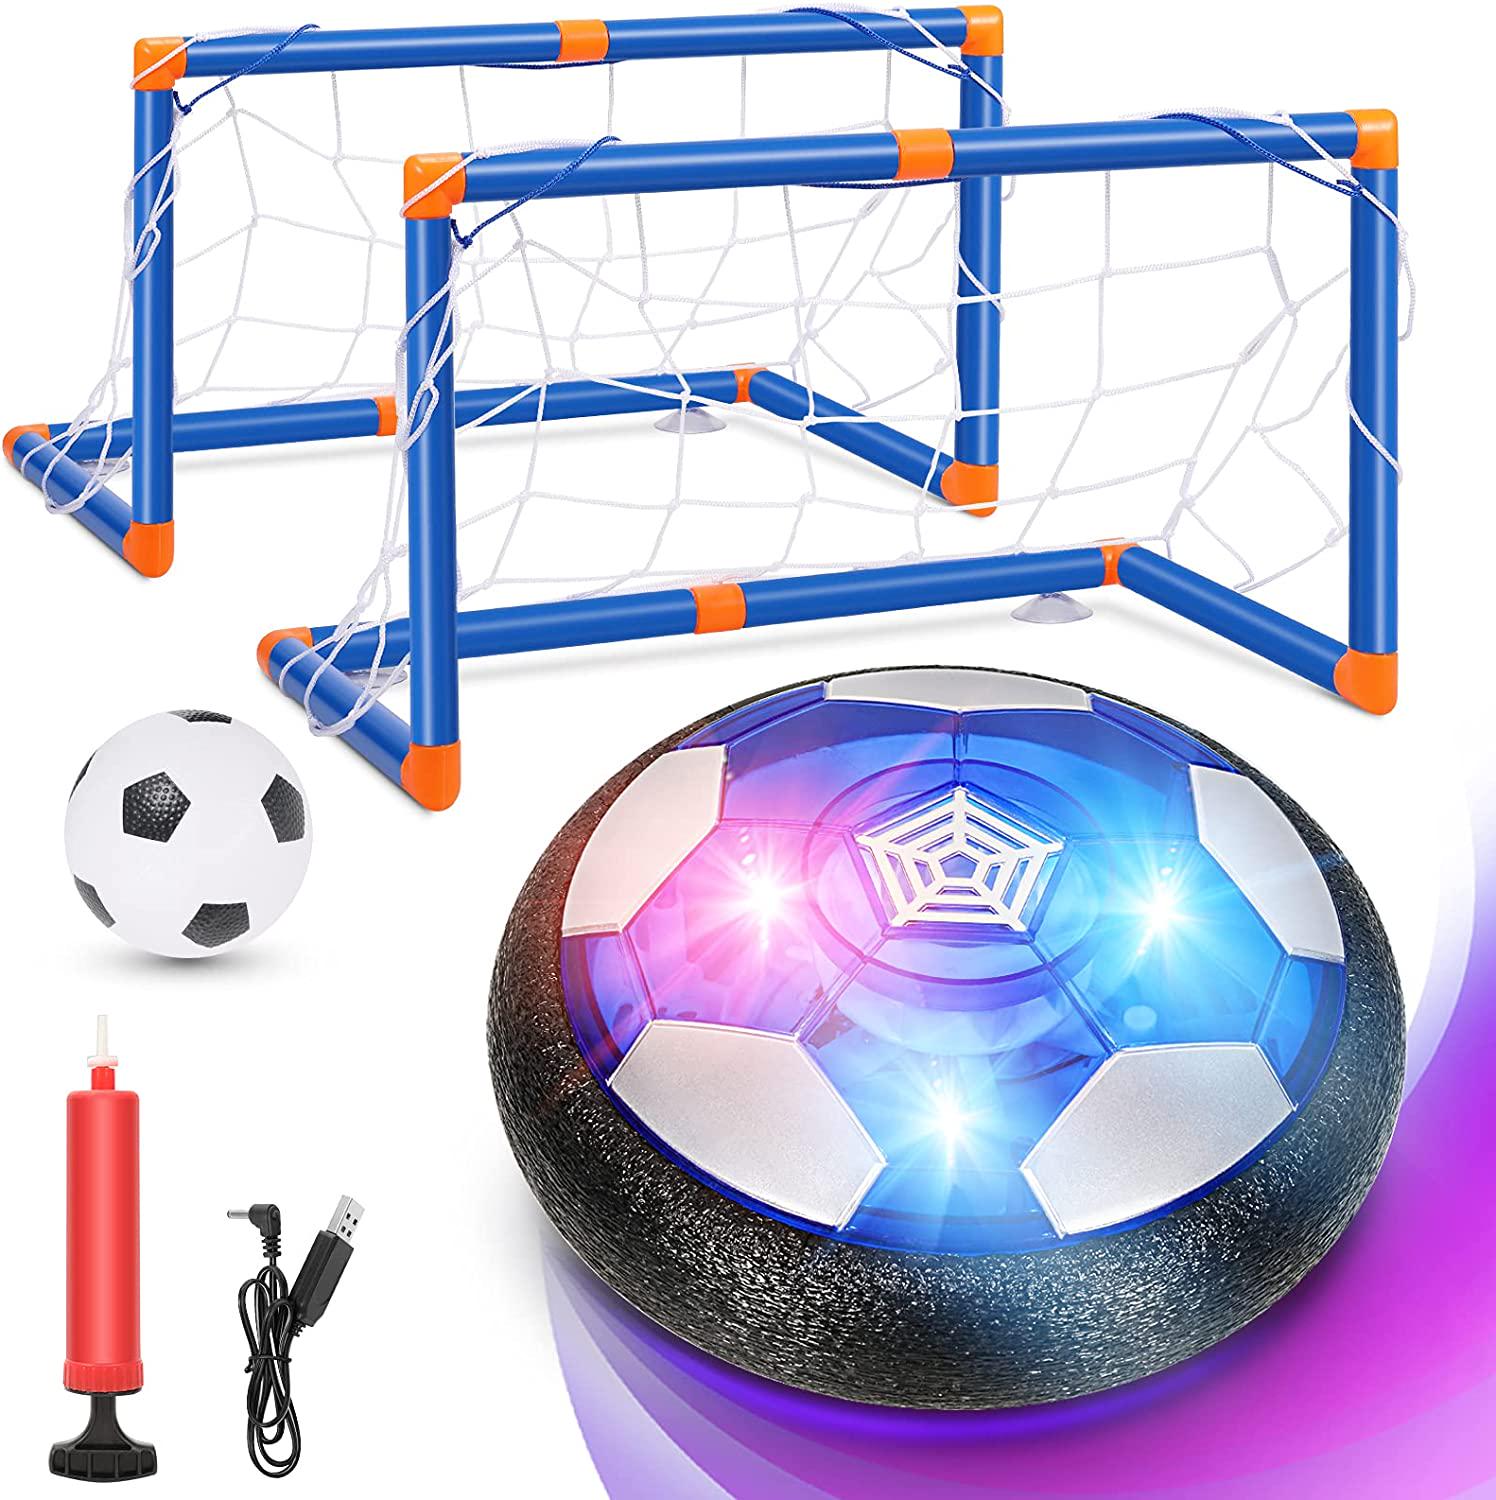 Tiikiy, Kids Hover Soccer Ball Set, Rechargeable Air Soccer Fun Toys with 2 Goals, LED Light and Foam Bumper for Boys Girls Indoor Outdoor Games, Including an Inflatable Ball